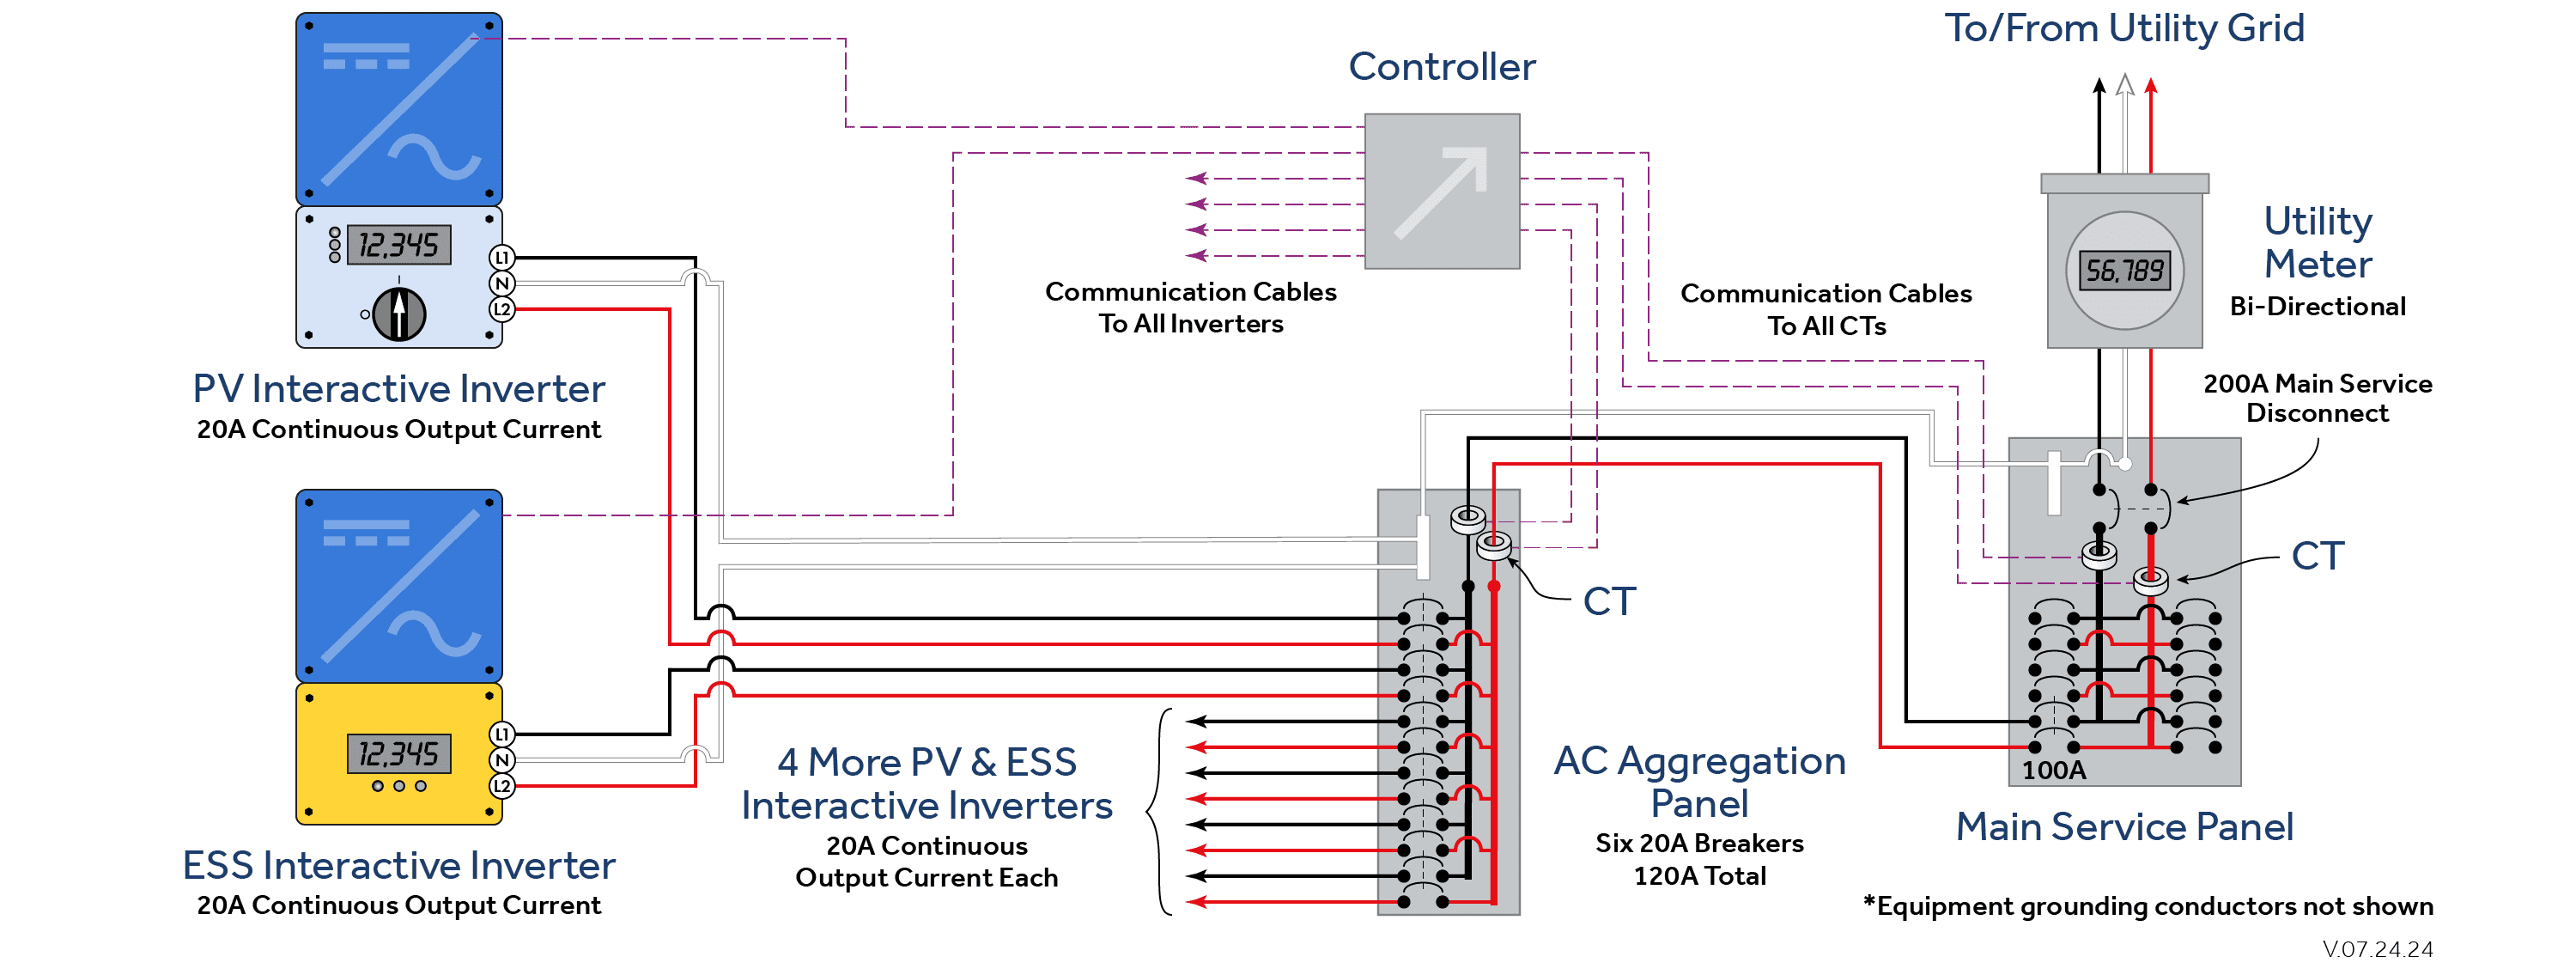 Wiring schematic for a solar-plus-storage system with an external PCS. In this example, the power control “system” consists of a controller, CTs, and communication cables